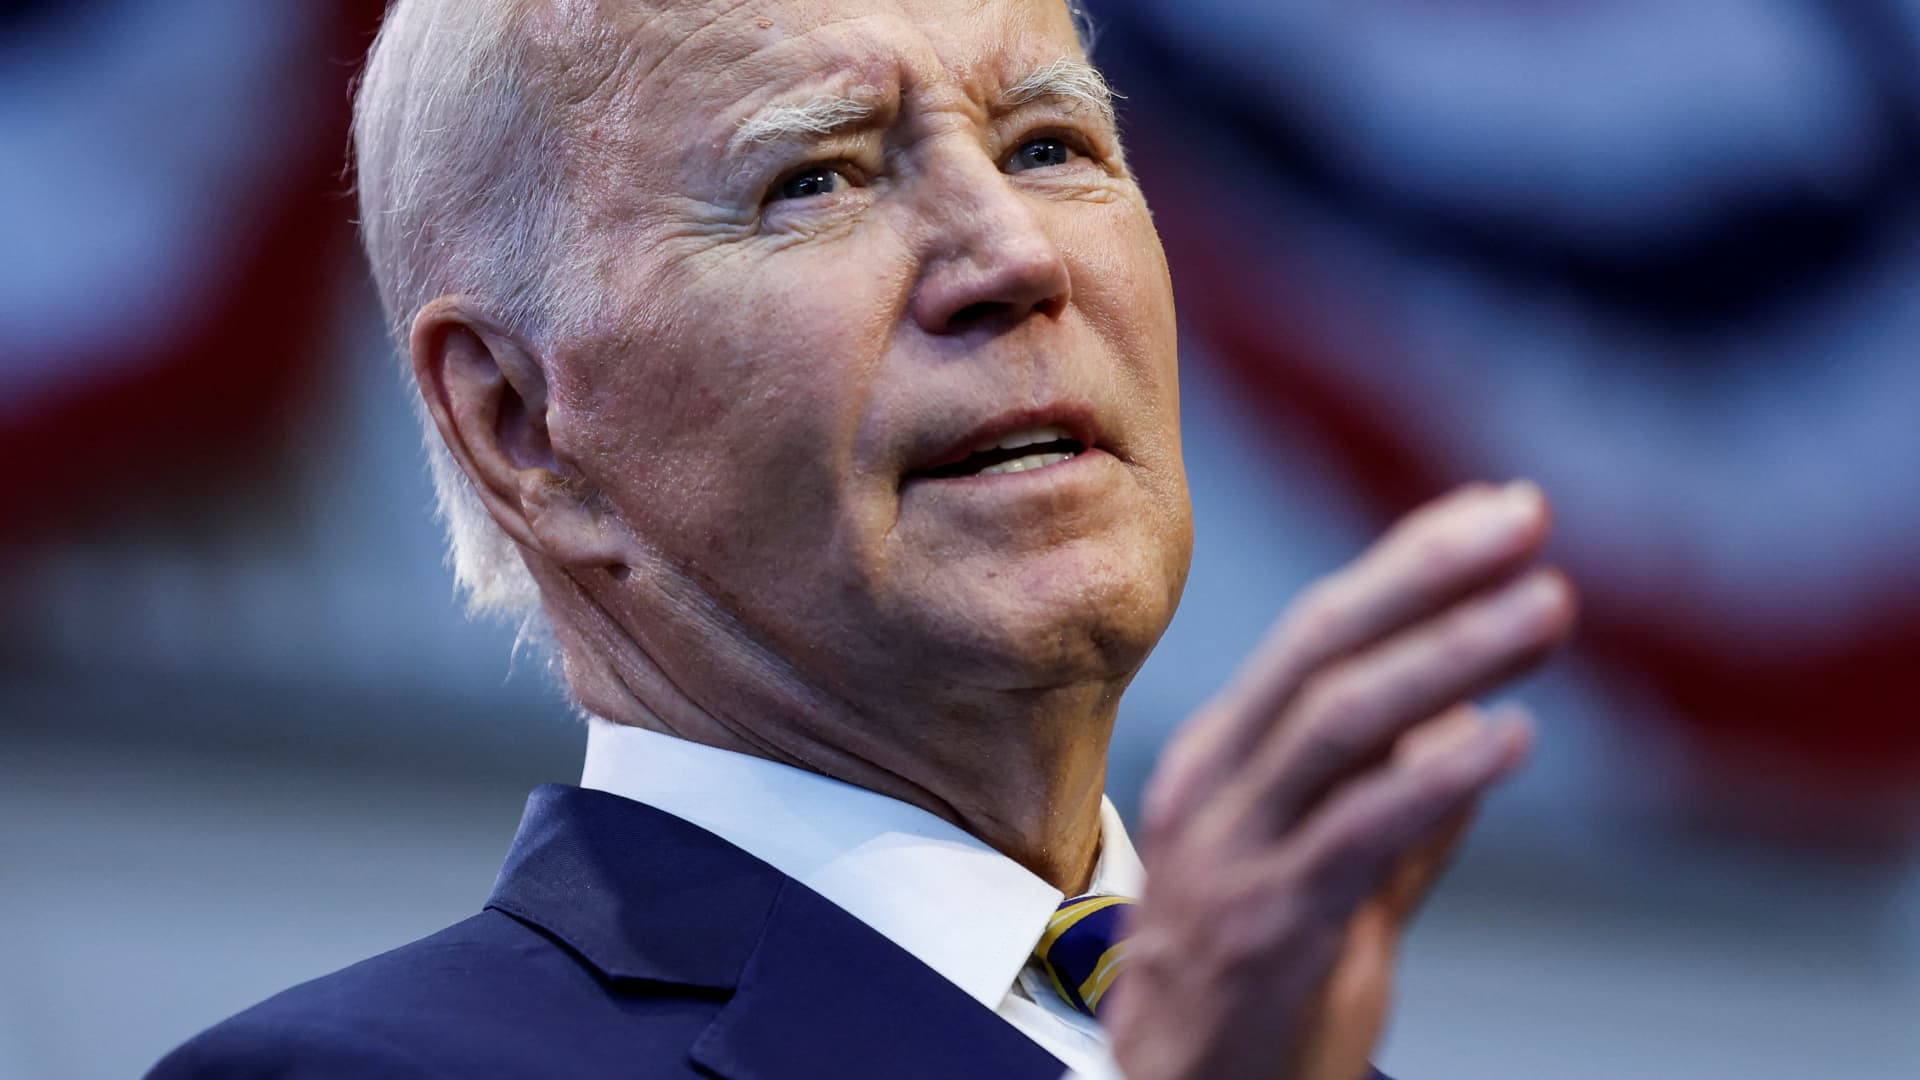 House Oversight Committee to hold first Biden impeachment inquiry hearing next week